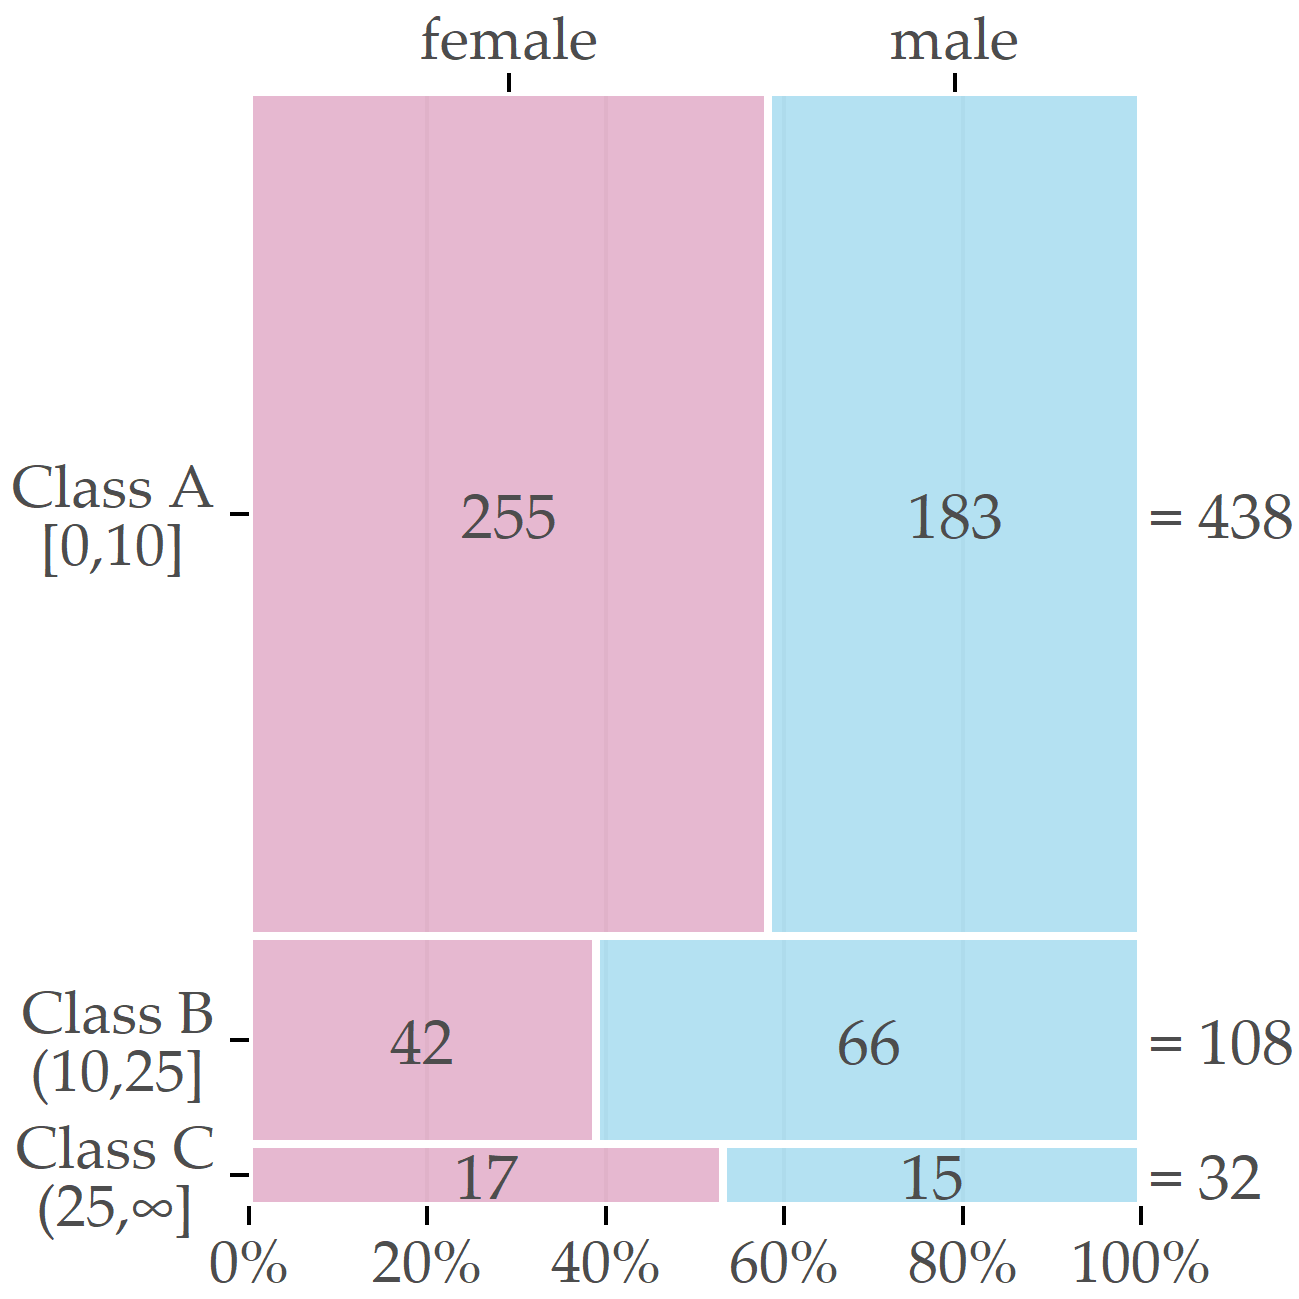 Sex-specific distribution of the target variable. The boxes’ relative sizes depict the number of female and male participants for each of the classes.